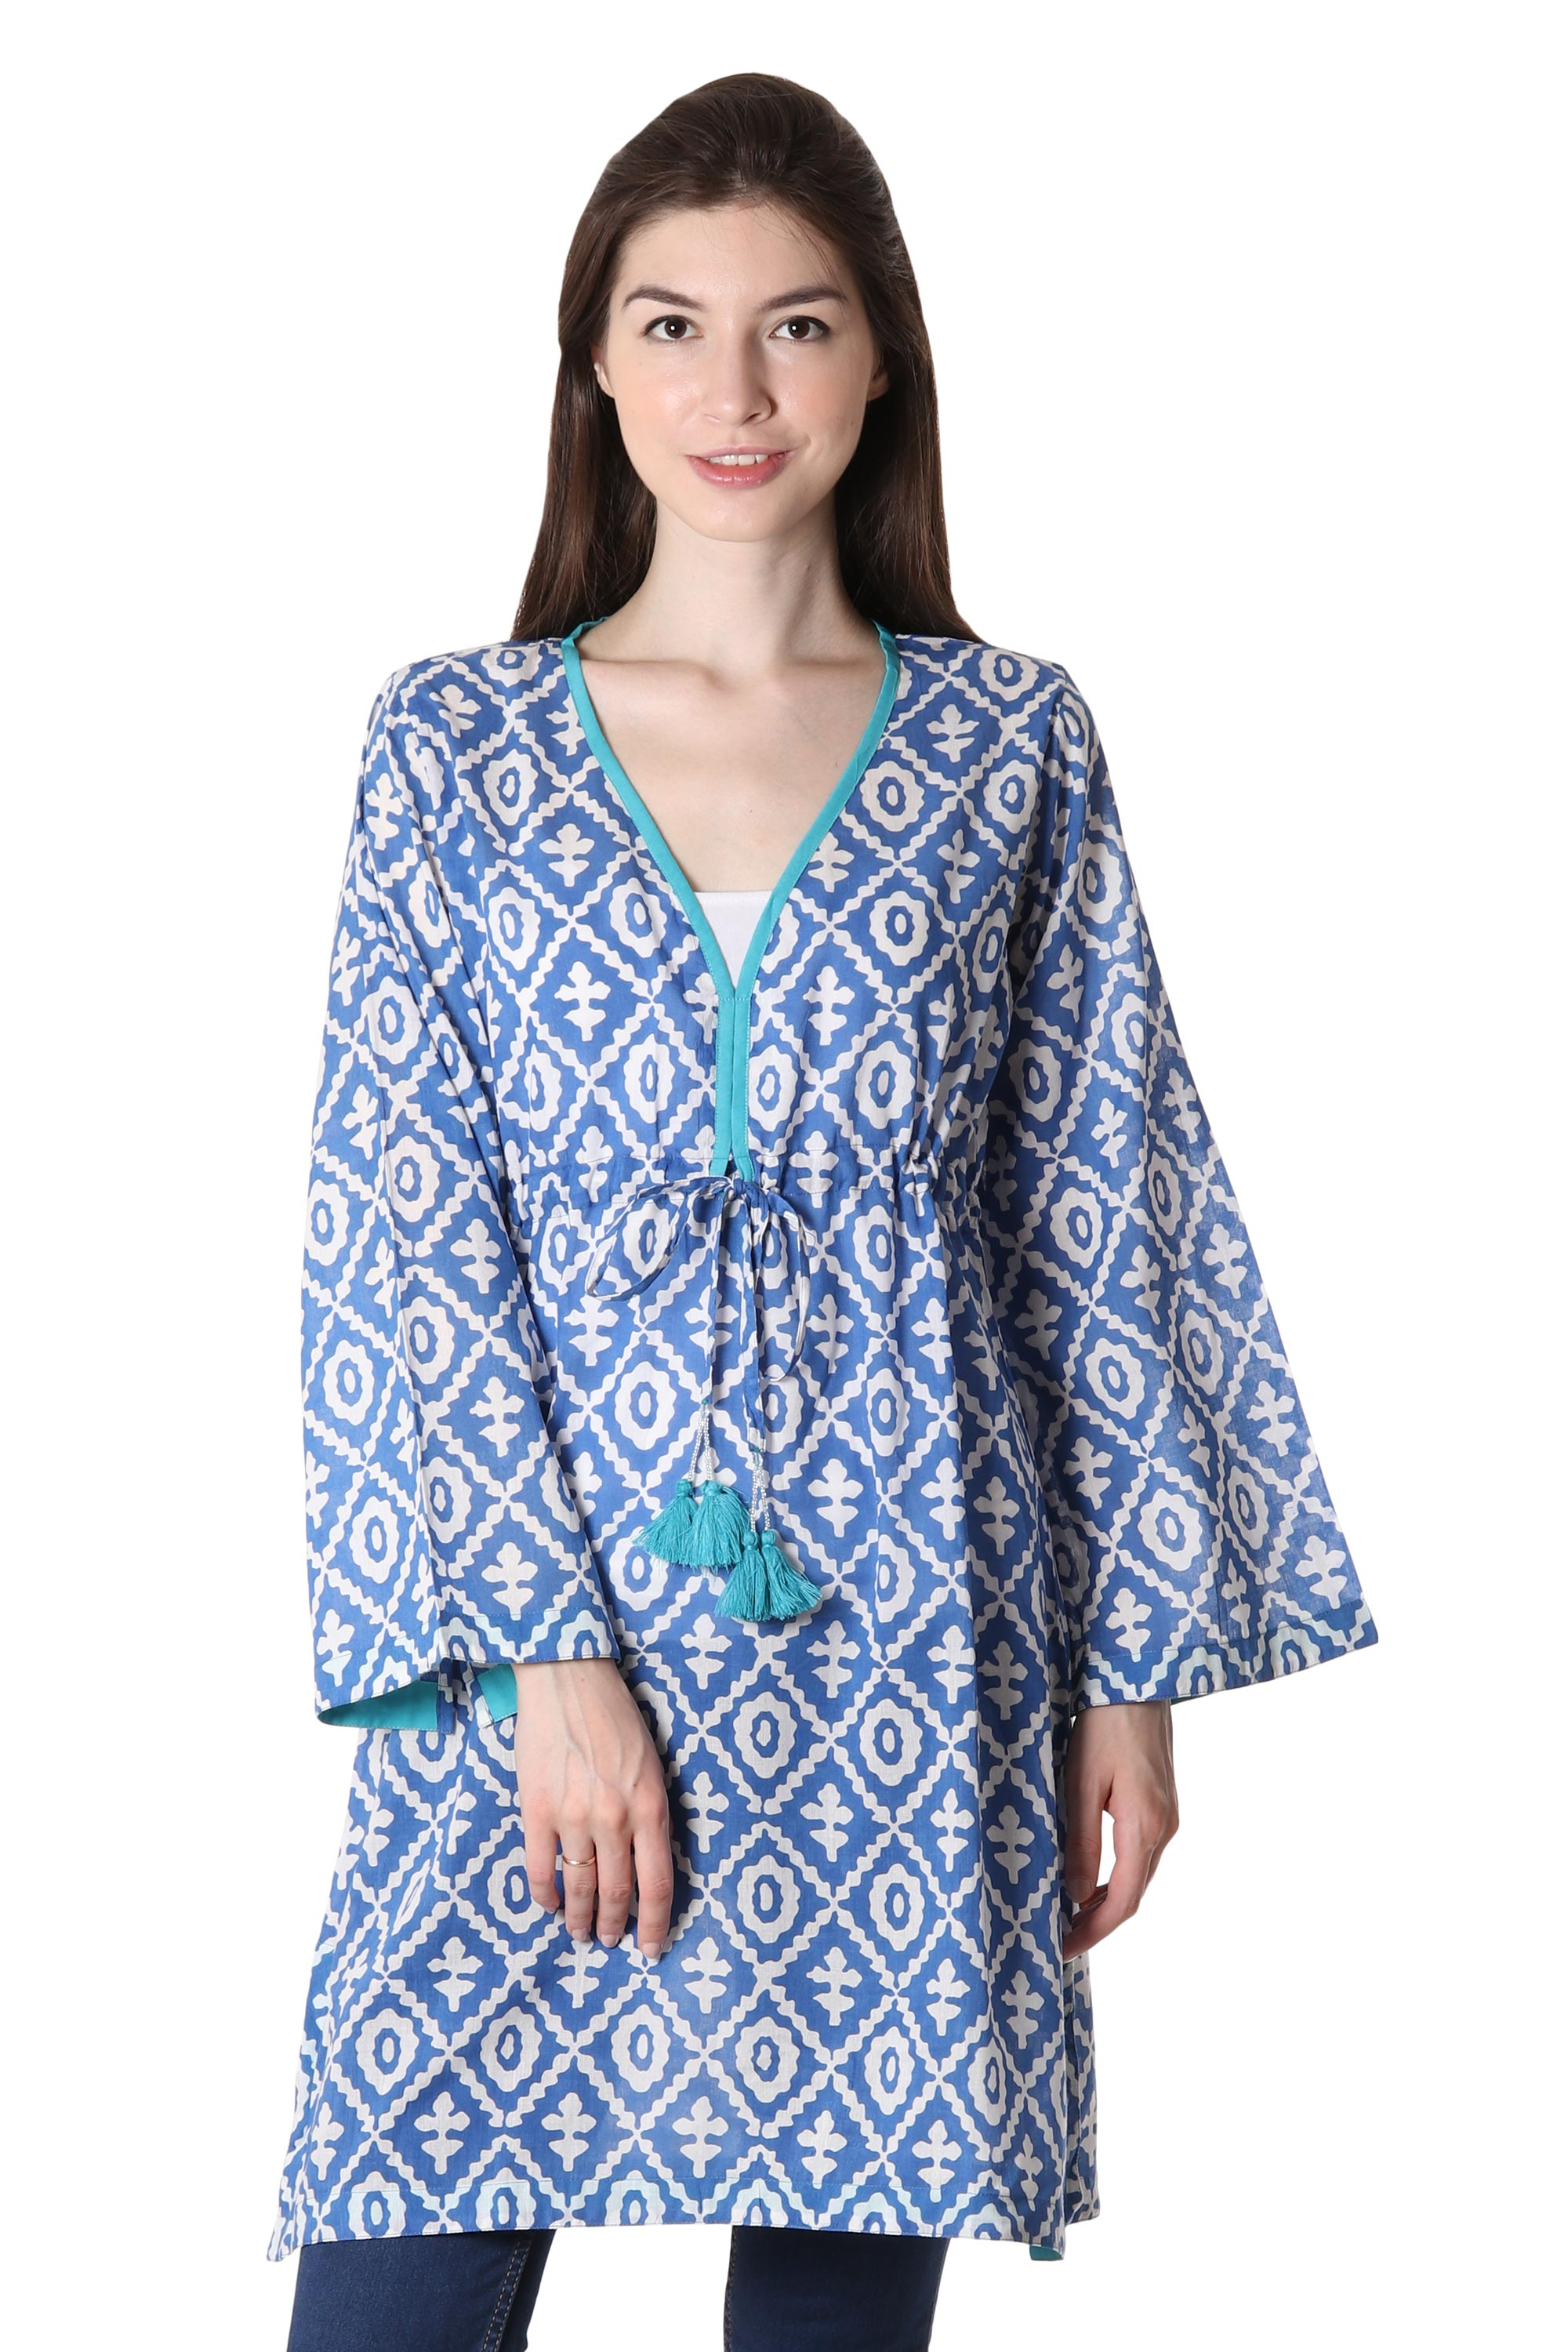 blue and white caftan